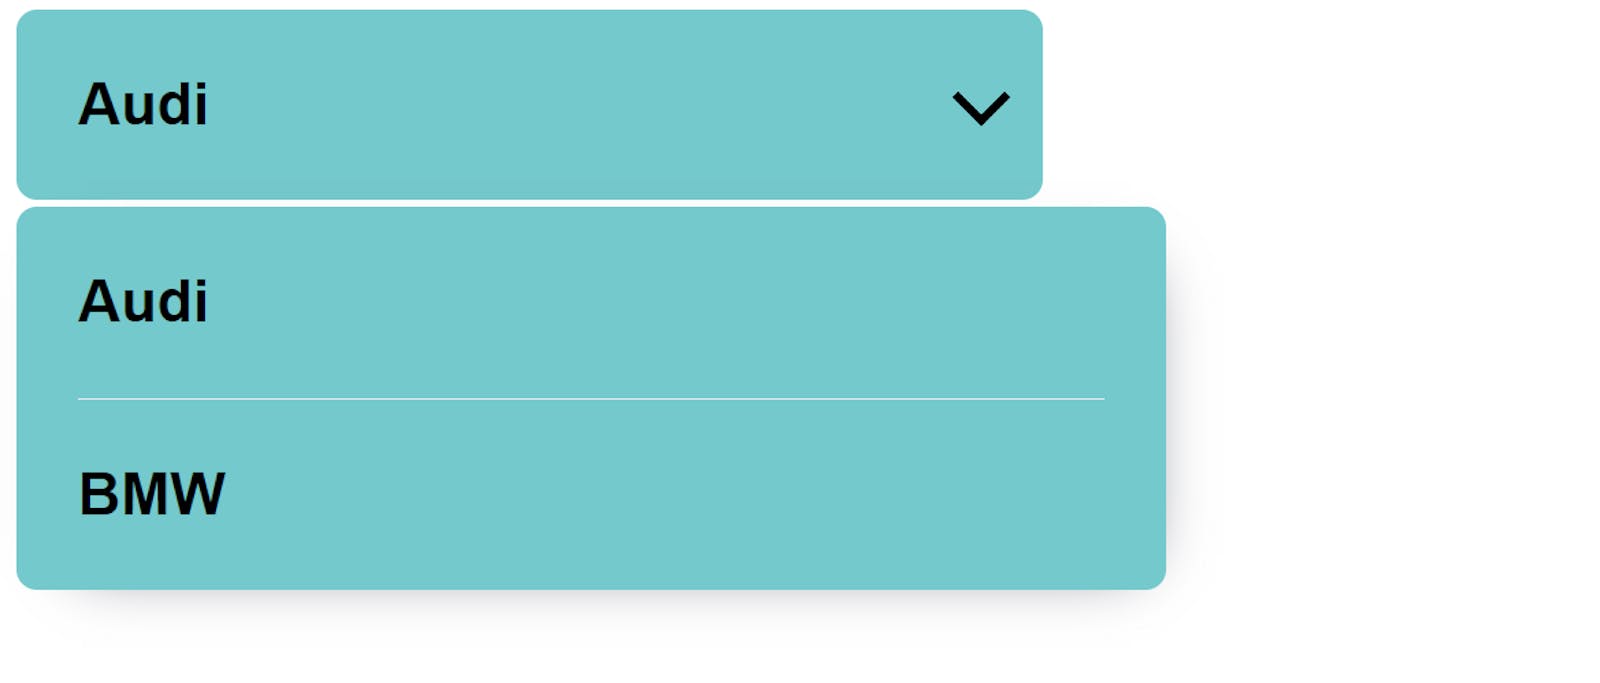 Custom dropdown select with CSS and JS